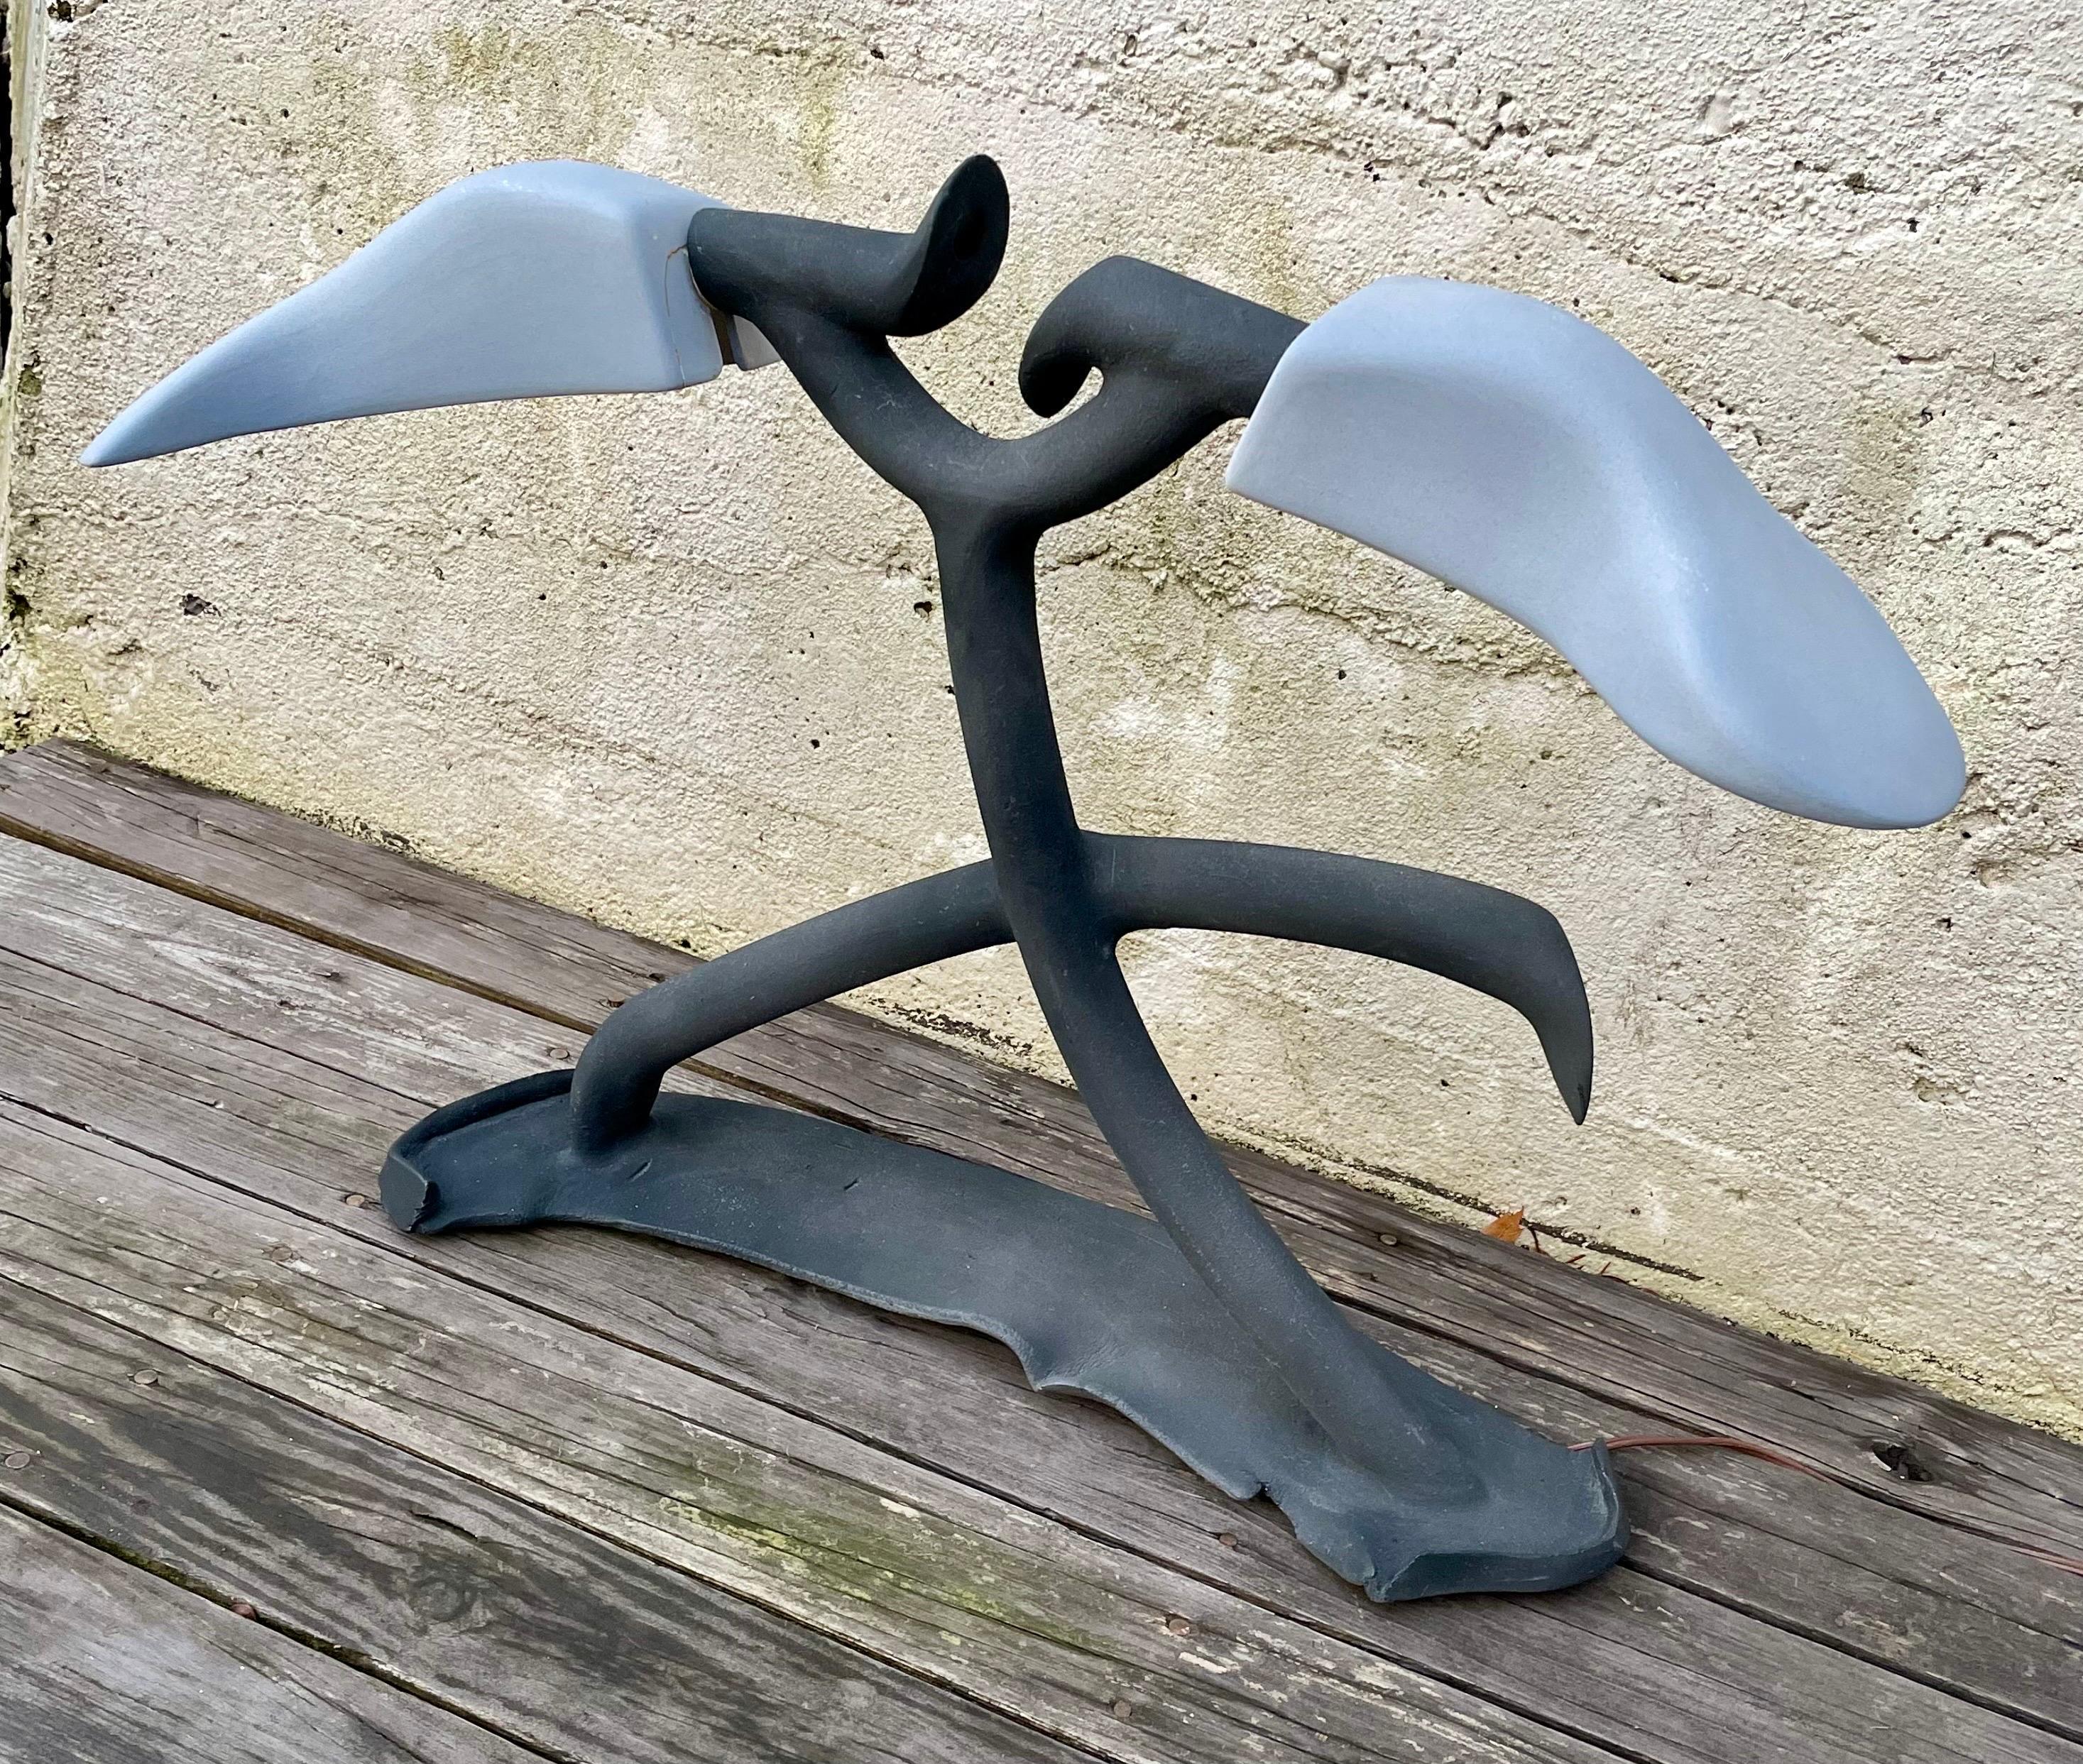 Very cool post modern sculptural ceramic table lamp by Michael Blair, 1987
Signed by the artist.